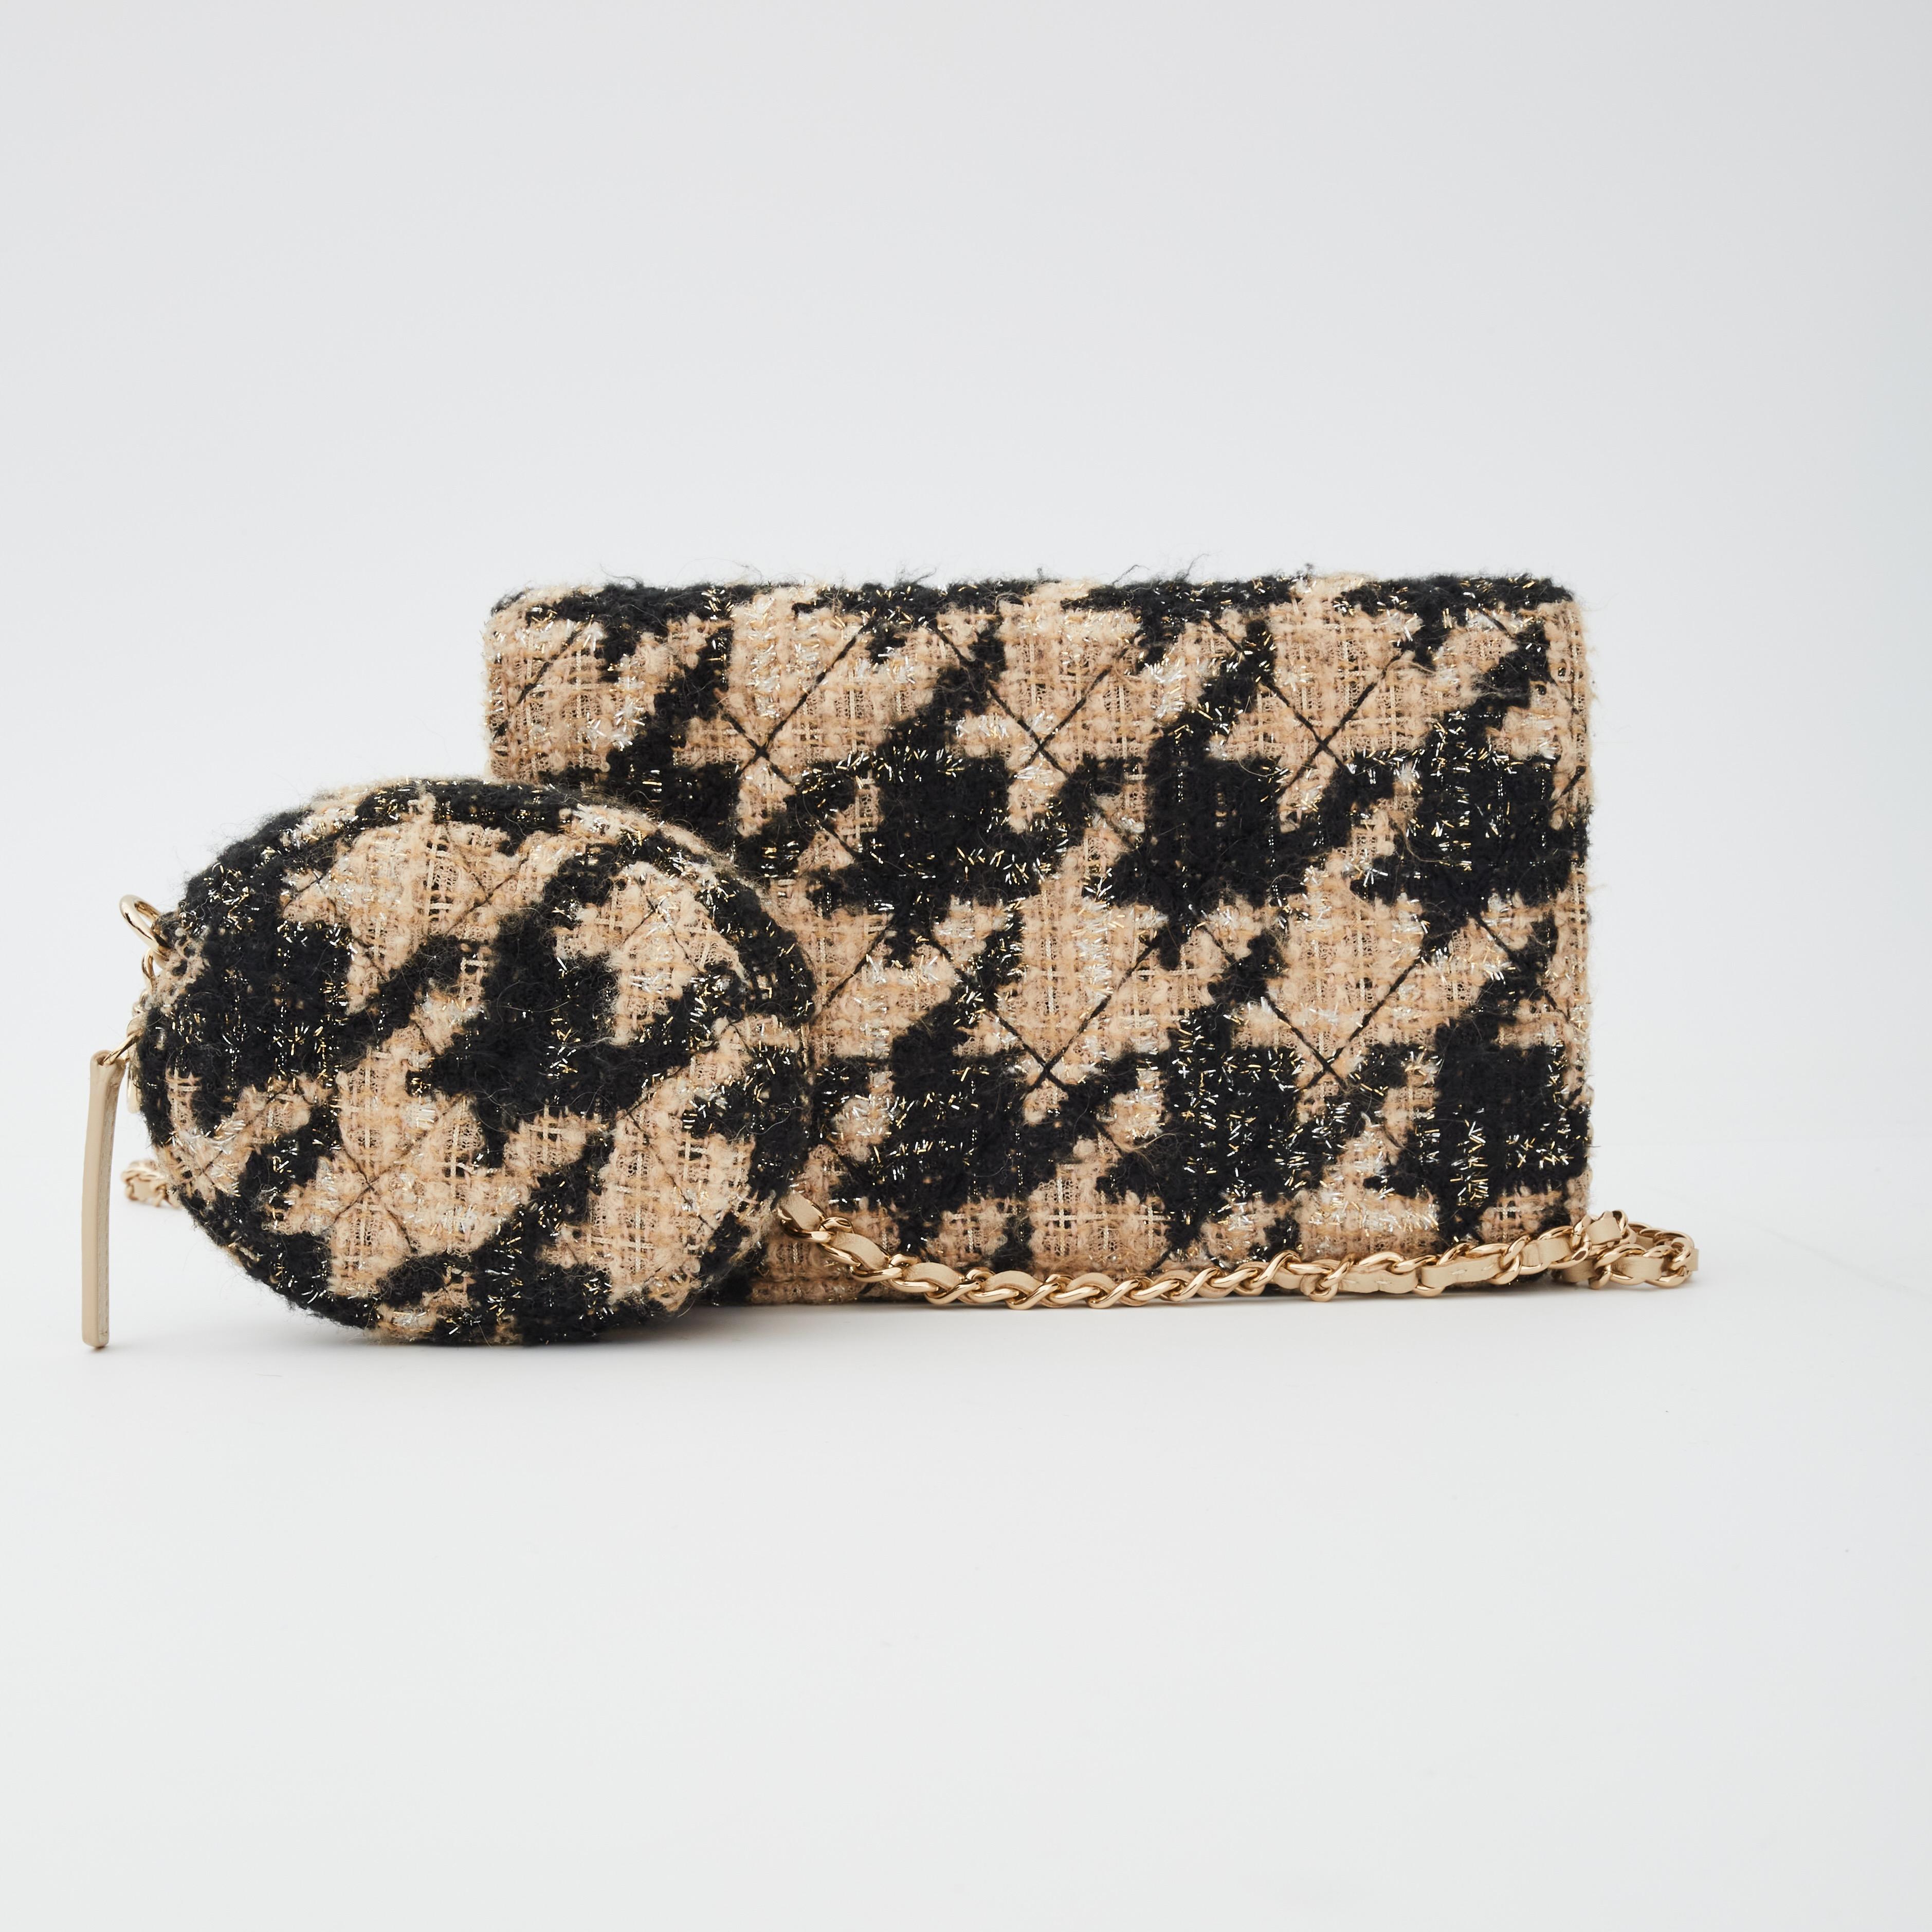 This crossbody bag is made of diamond quilted tweed shearling in black and beige. The bag features a shoulder strap of a light gold chain interlaced with leather, a matching black Chanel CC logo on the front, a removable coin purse, a front flap